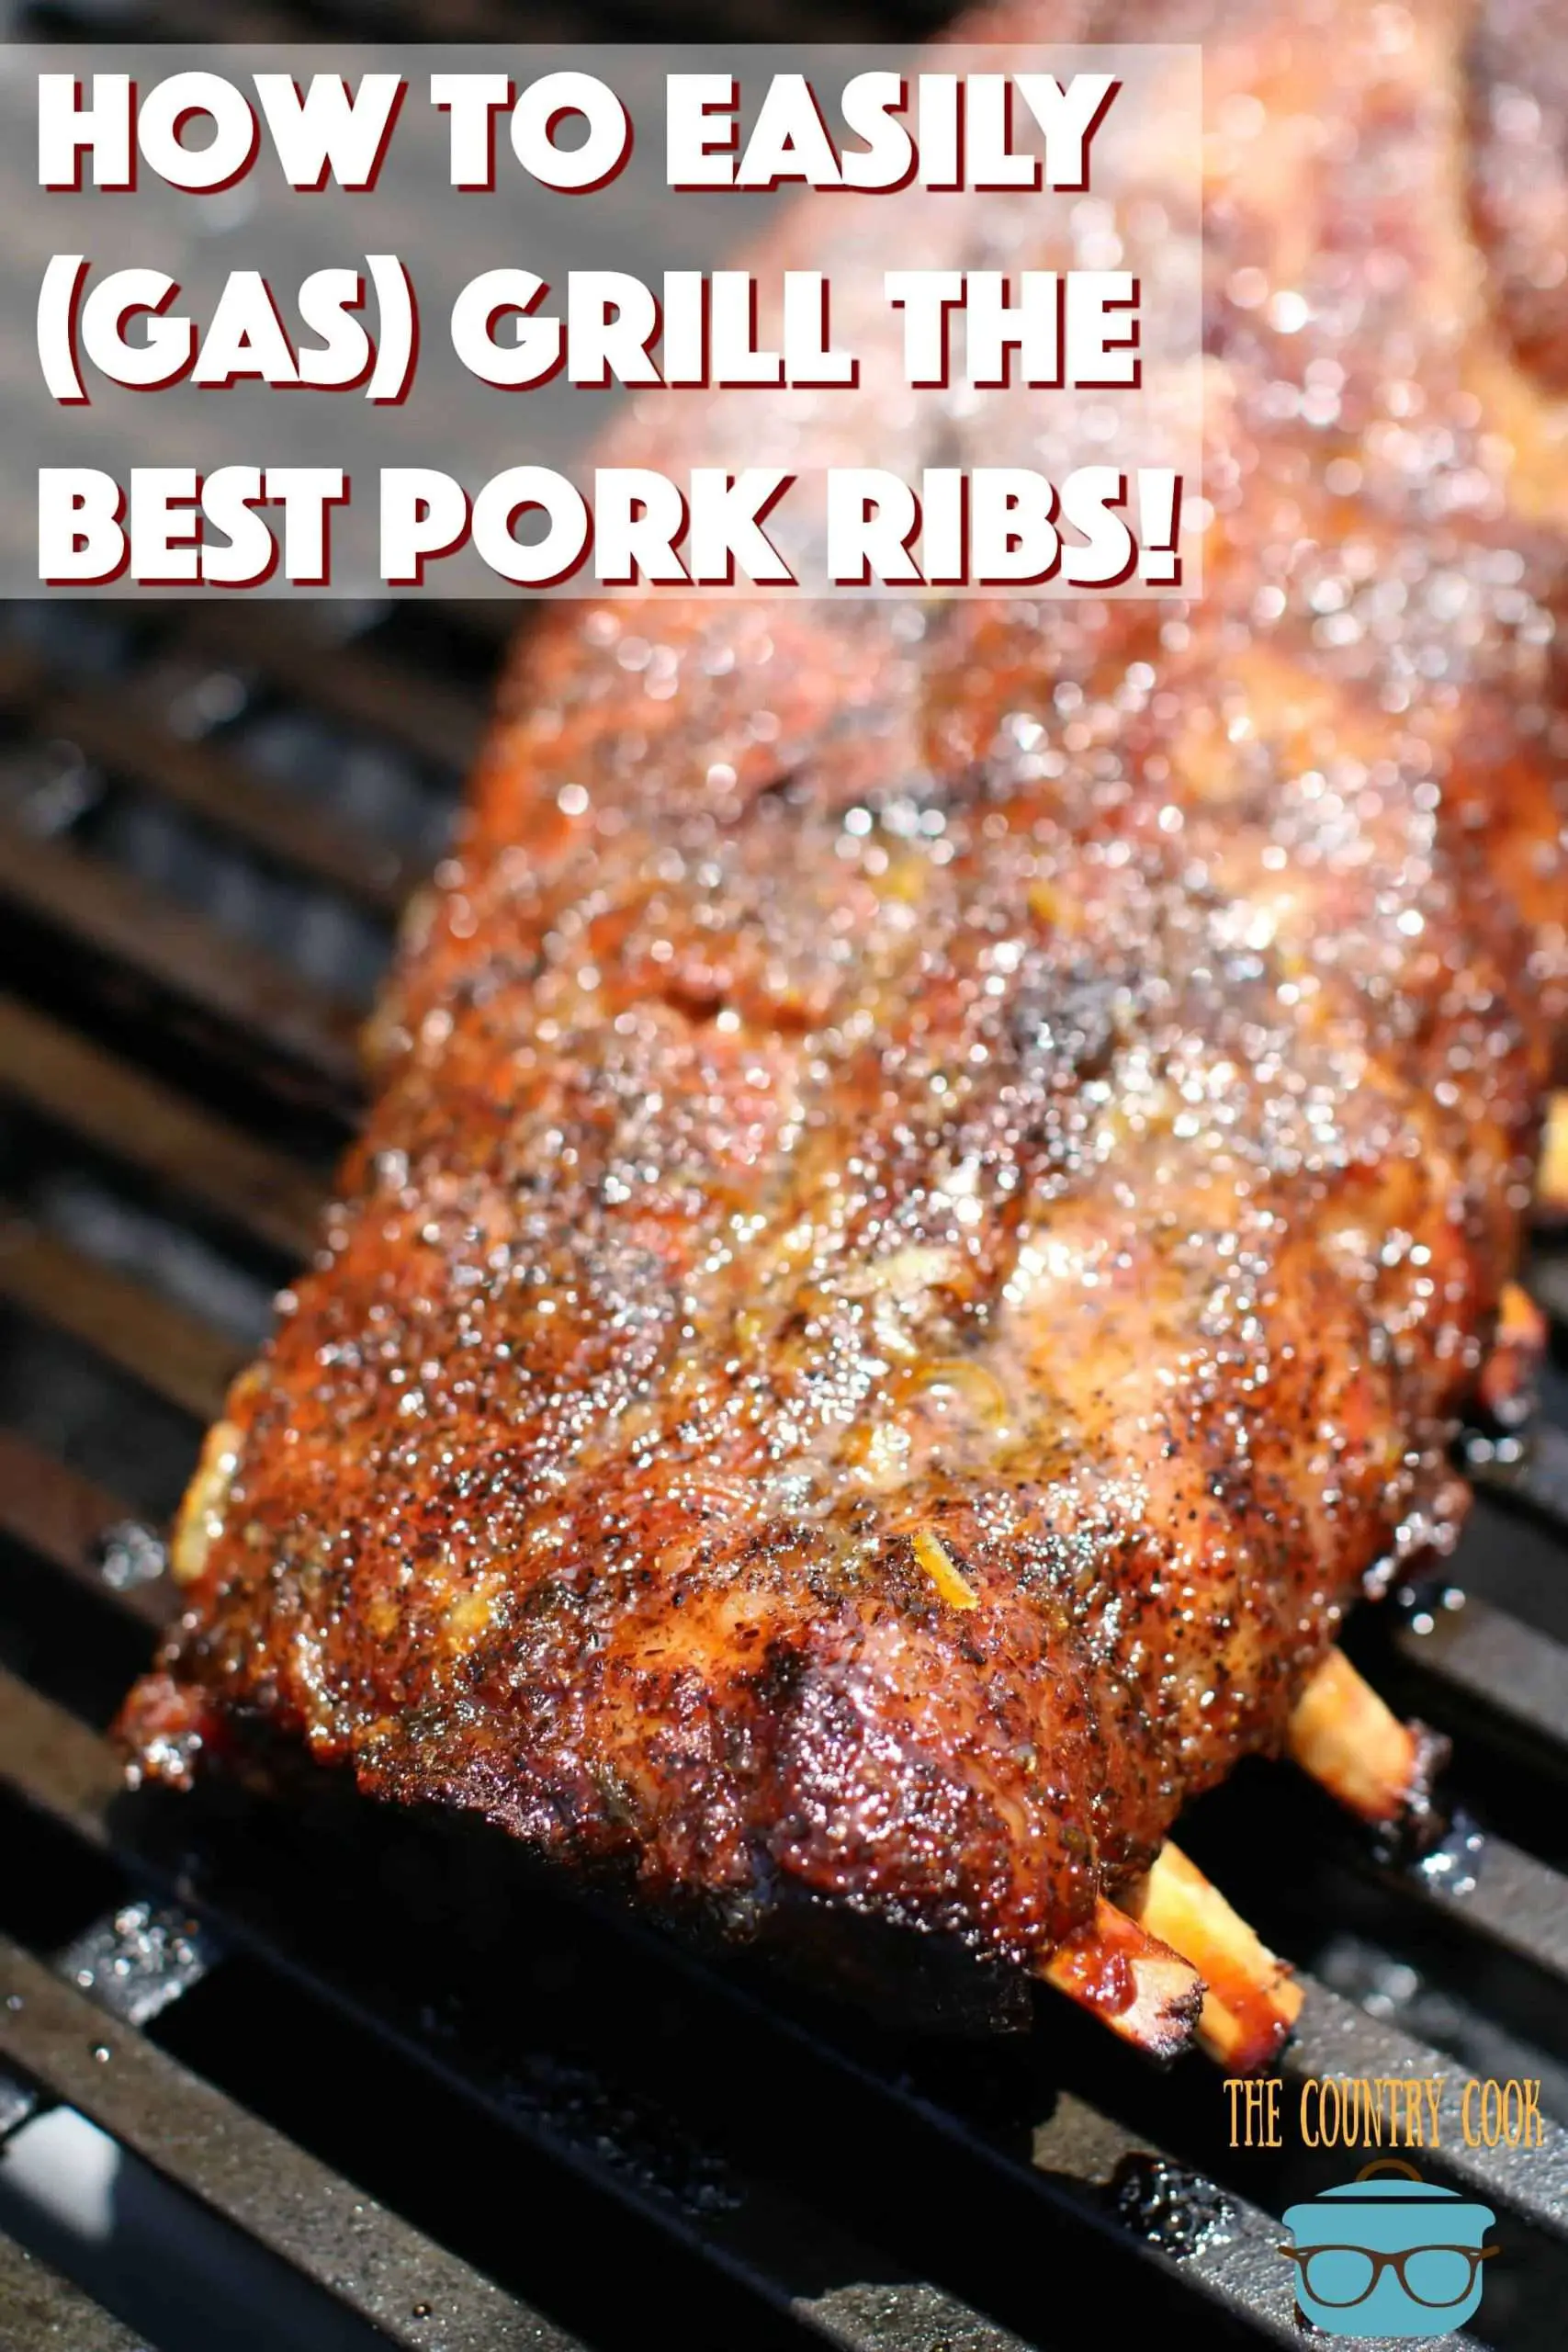 HOW TO GRILL THE BEST PORK RIBS (+Video)